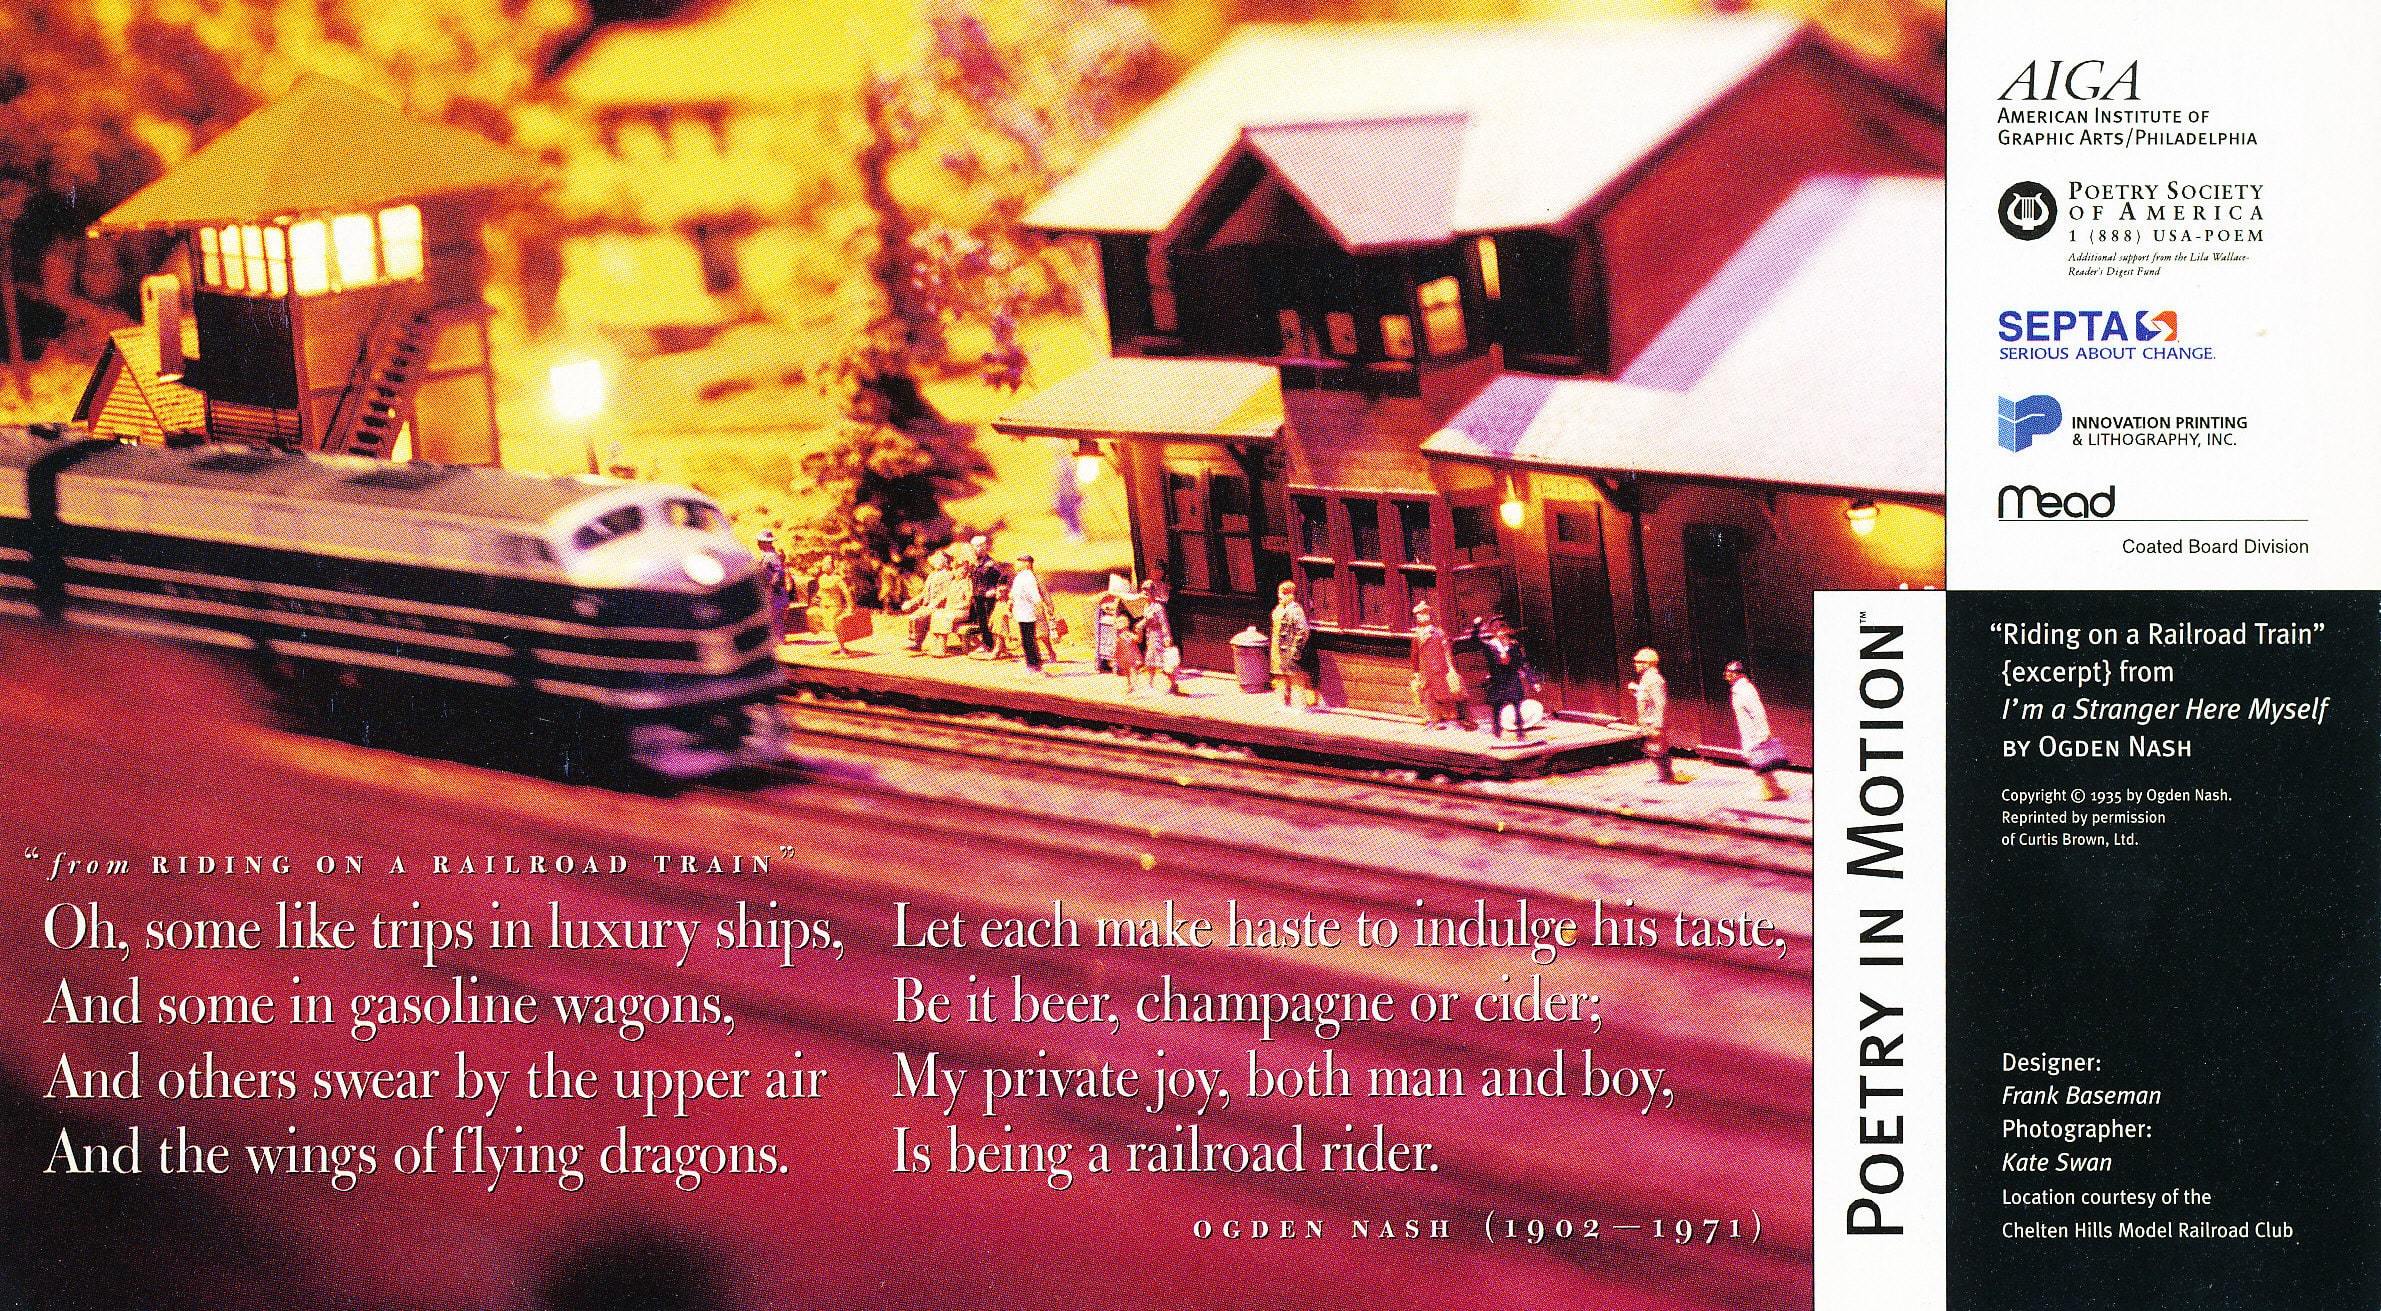 A poster features a model train pulling into a station where people wait to board. An excerpt from the poem Riding on a Railroad Train by Ogden Nash is written in white text.